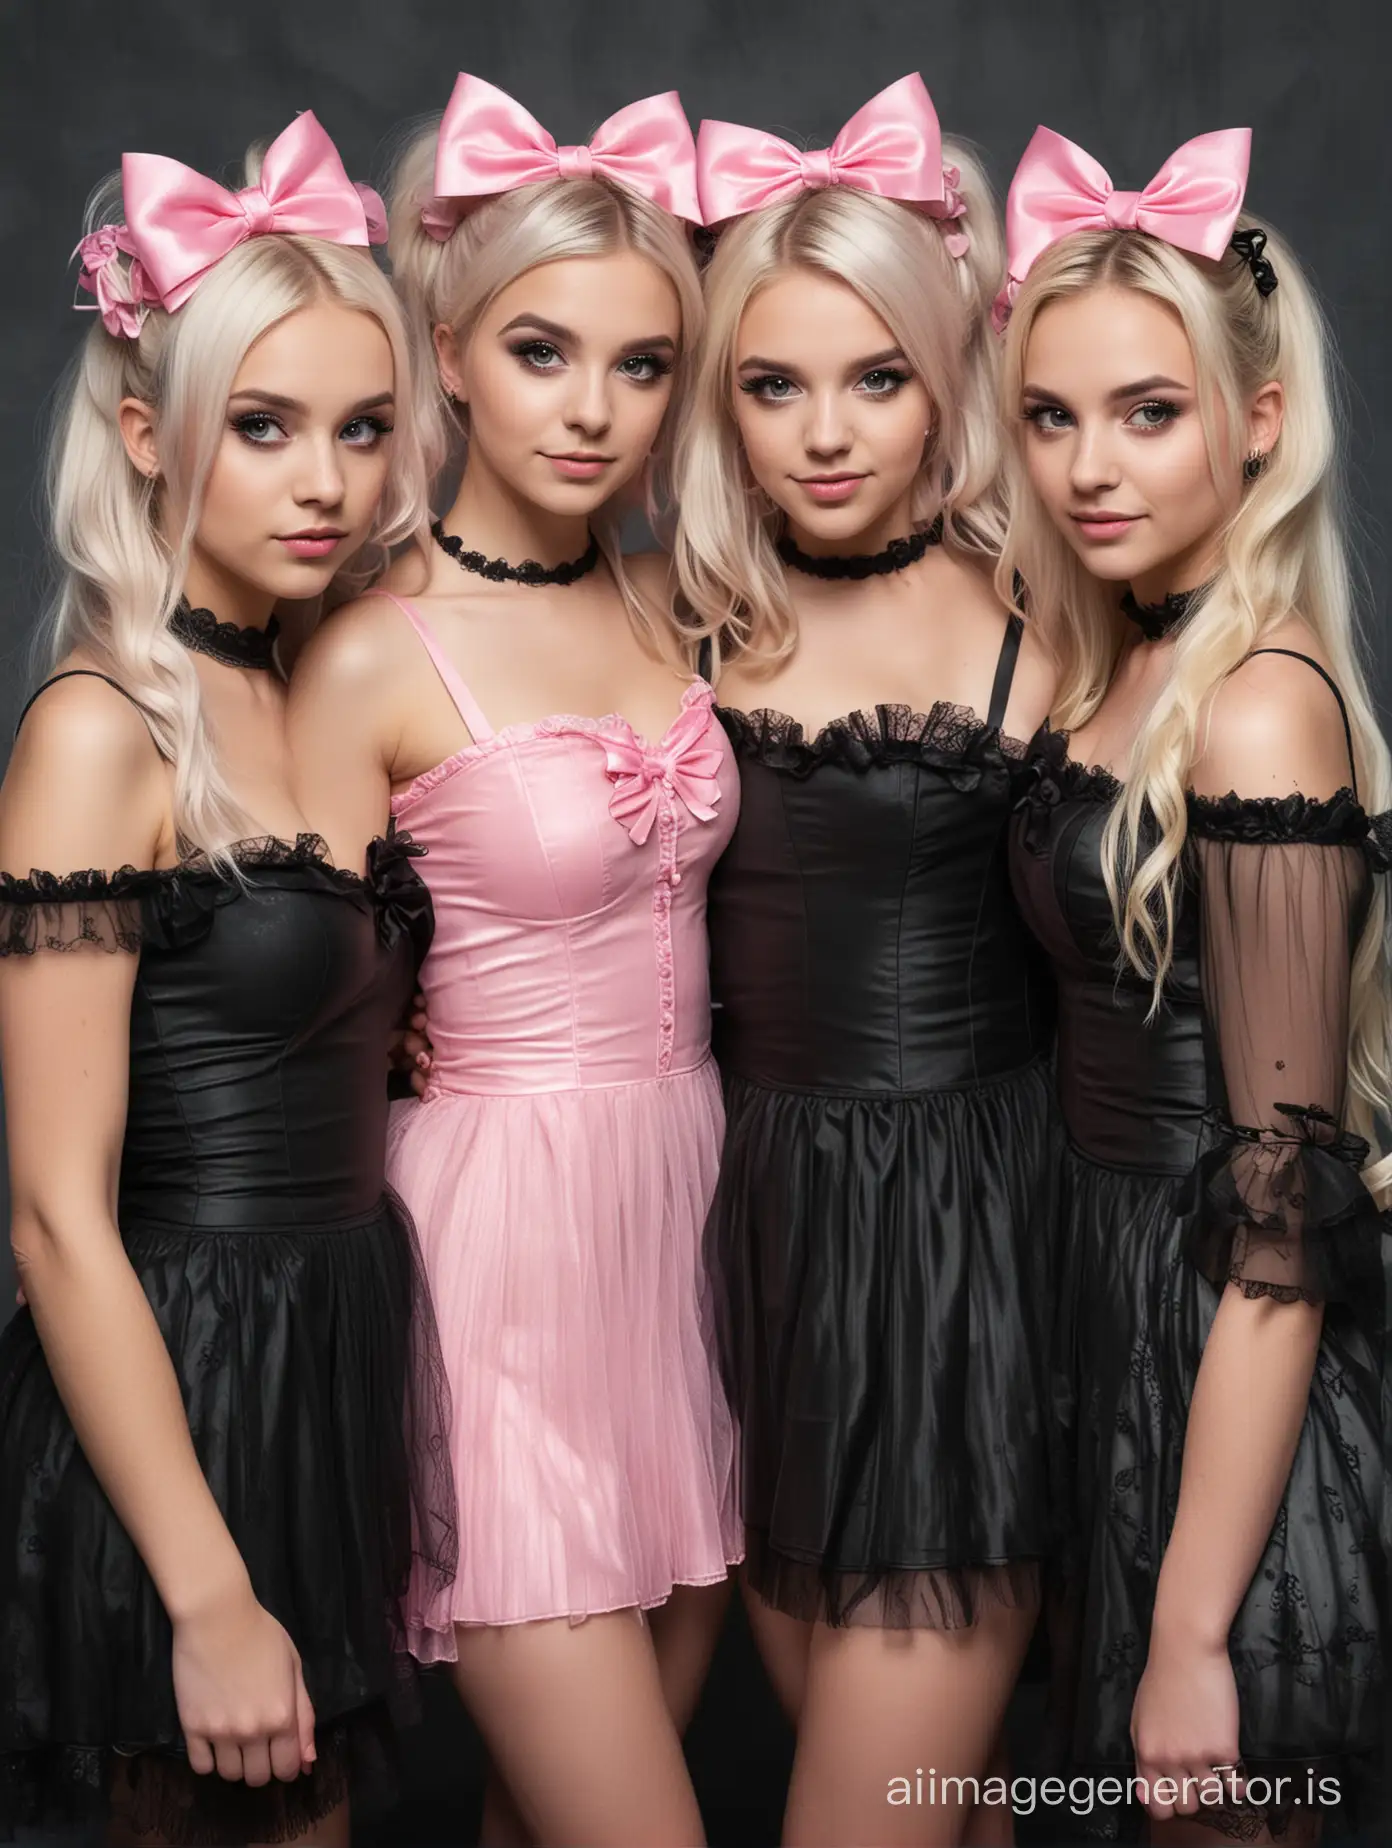 Group-Portrait-of-Four-Girls-Three-Blonde-Bridesmaids-and-One-Mysterious-Goth-Girl